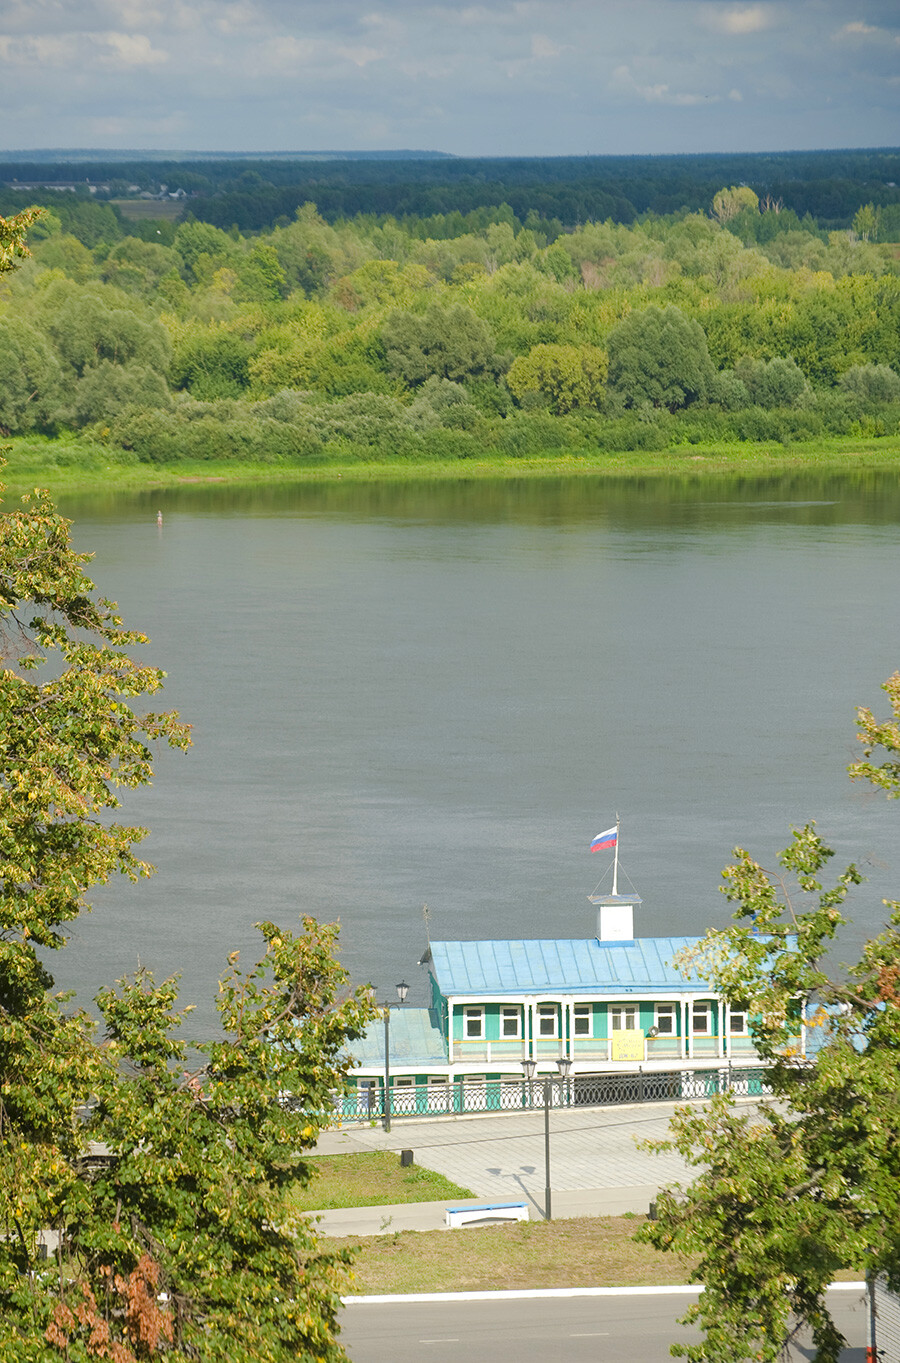 Murom. Oka River passenger station (typical floating wooden structure). August 16, 2012